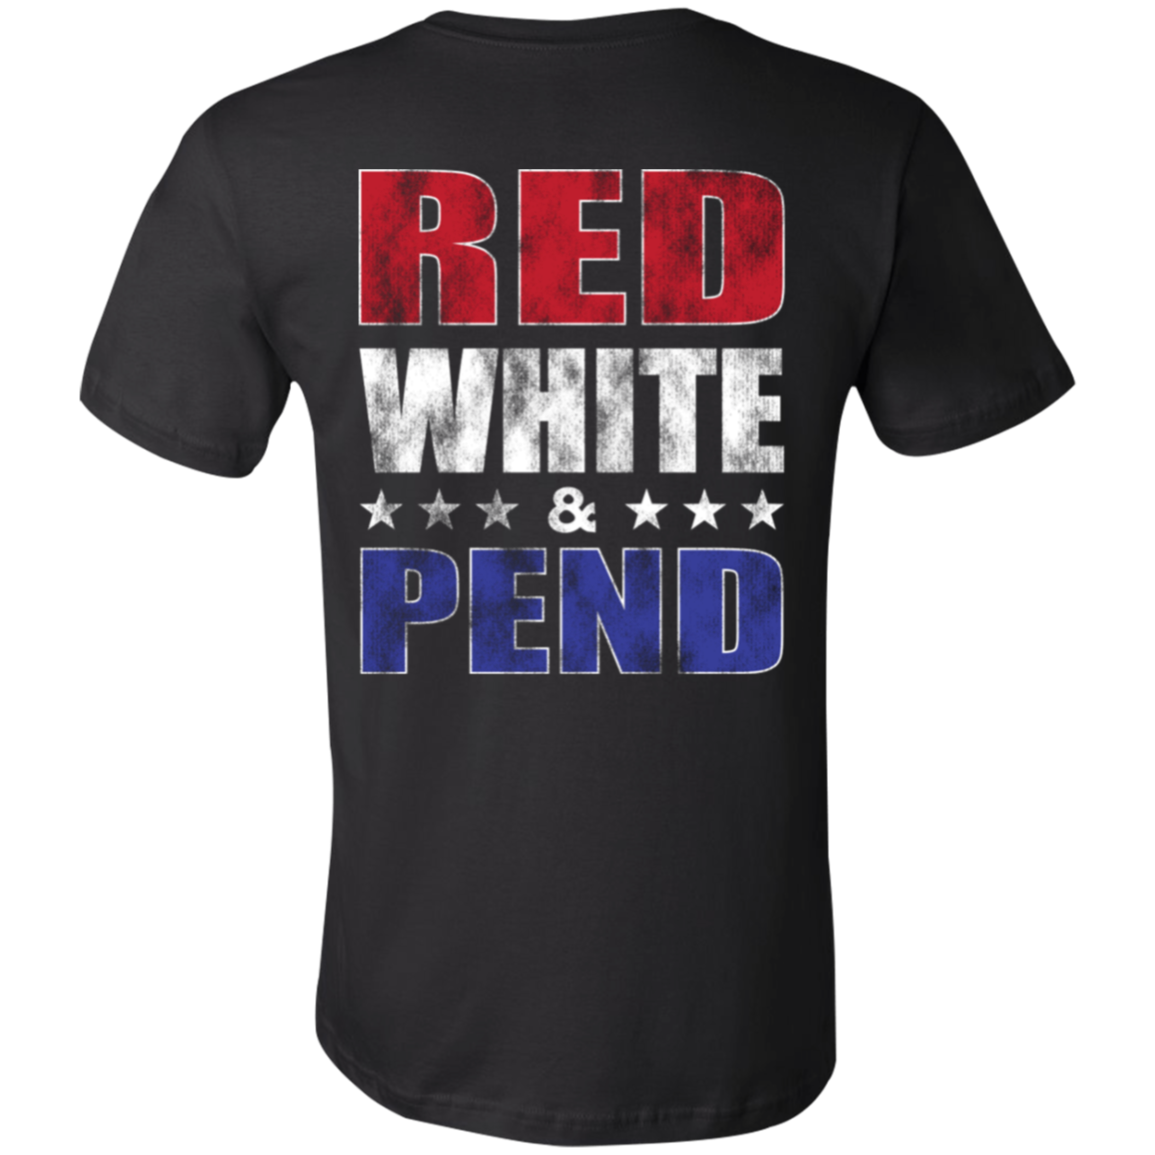 Red White & Pend (on Back) Shirt